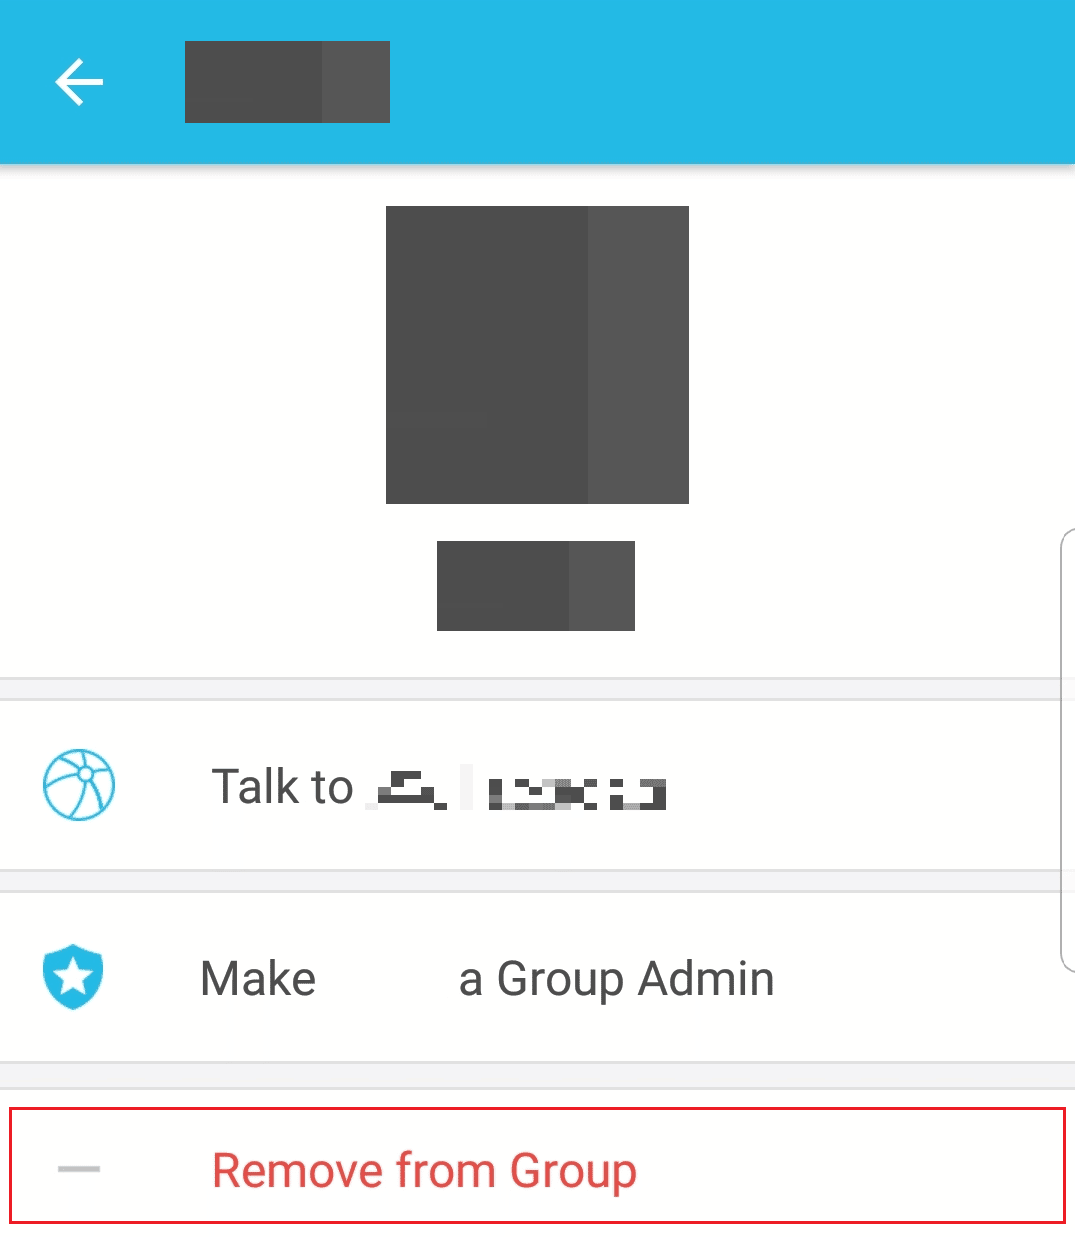 Tap on the Remove from Group option and confirm